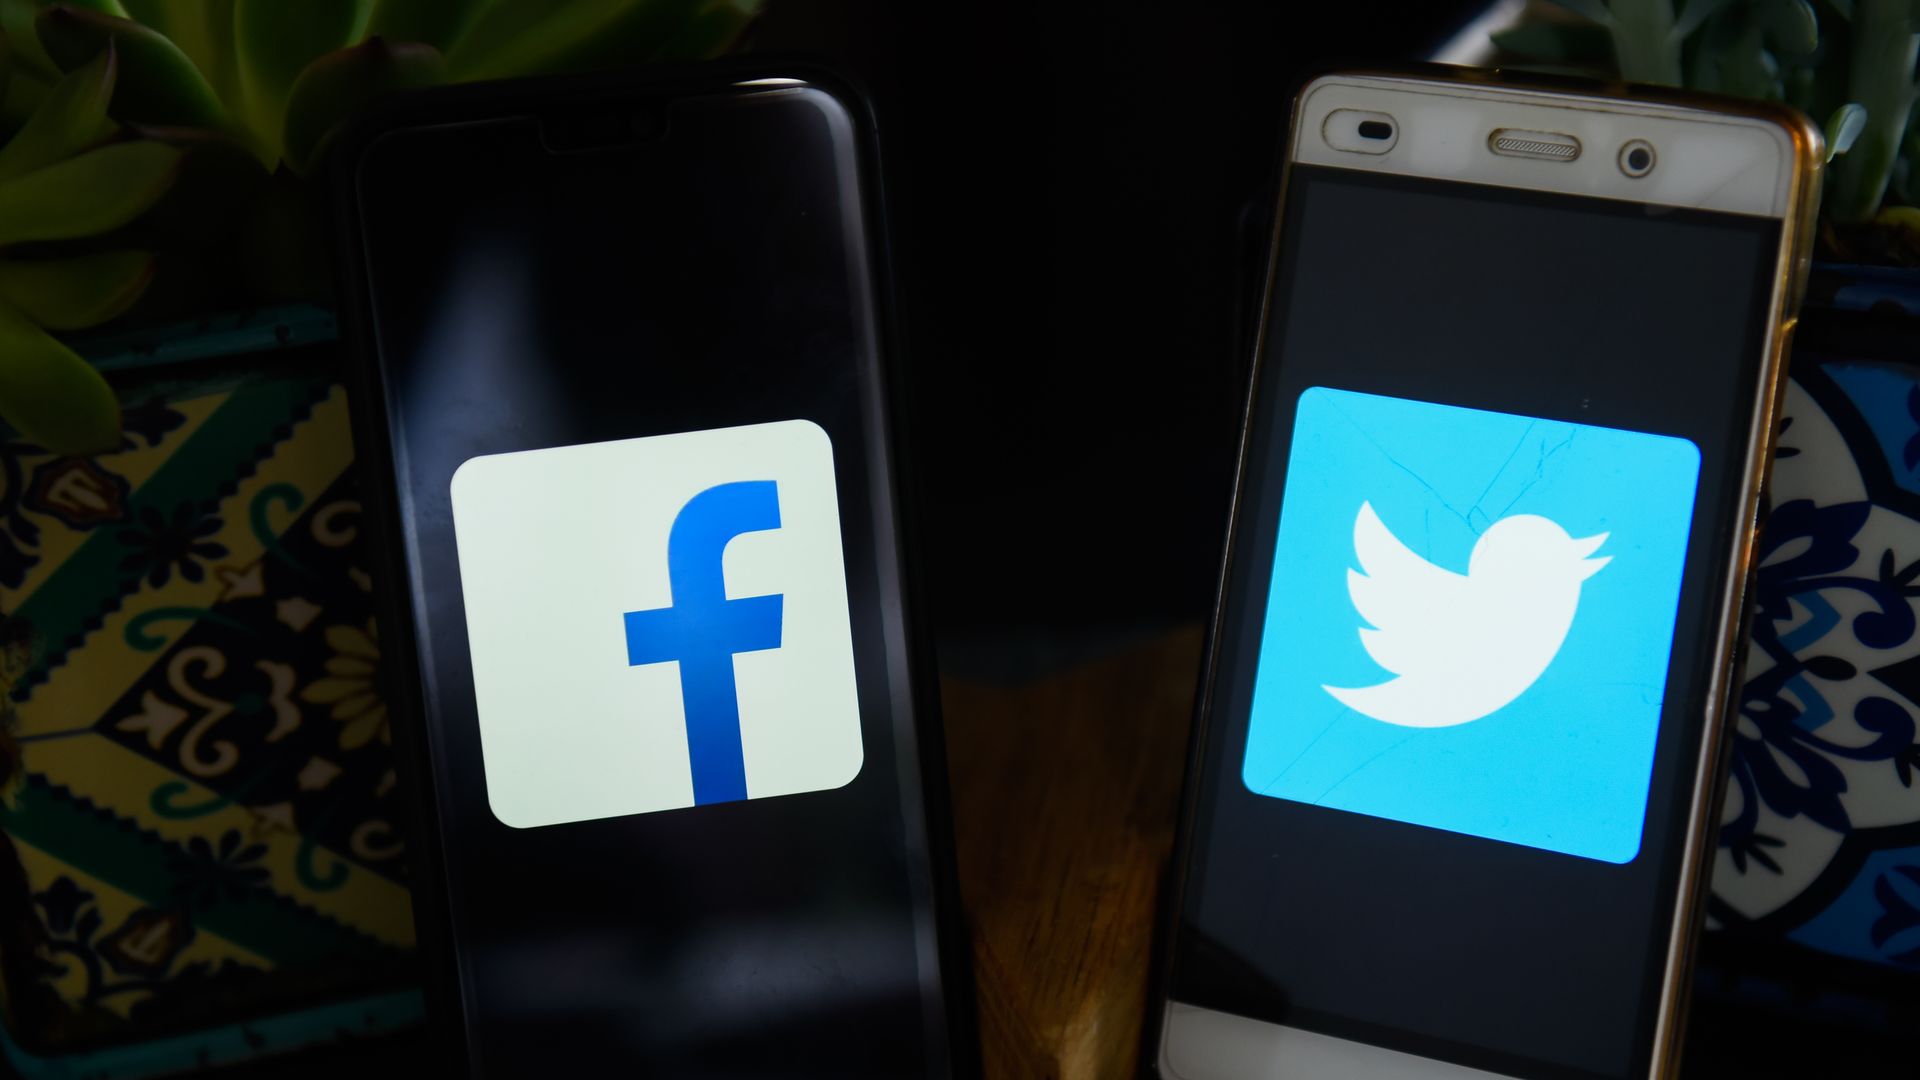 IPhones showing Facebook and Twitter logos